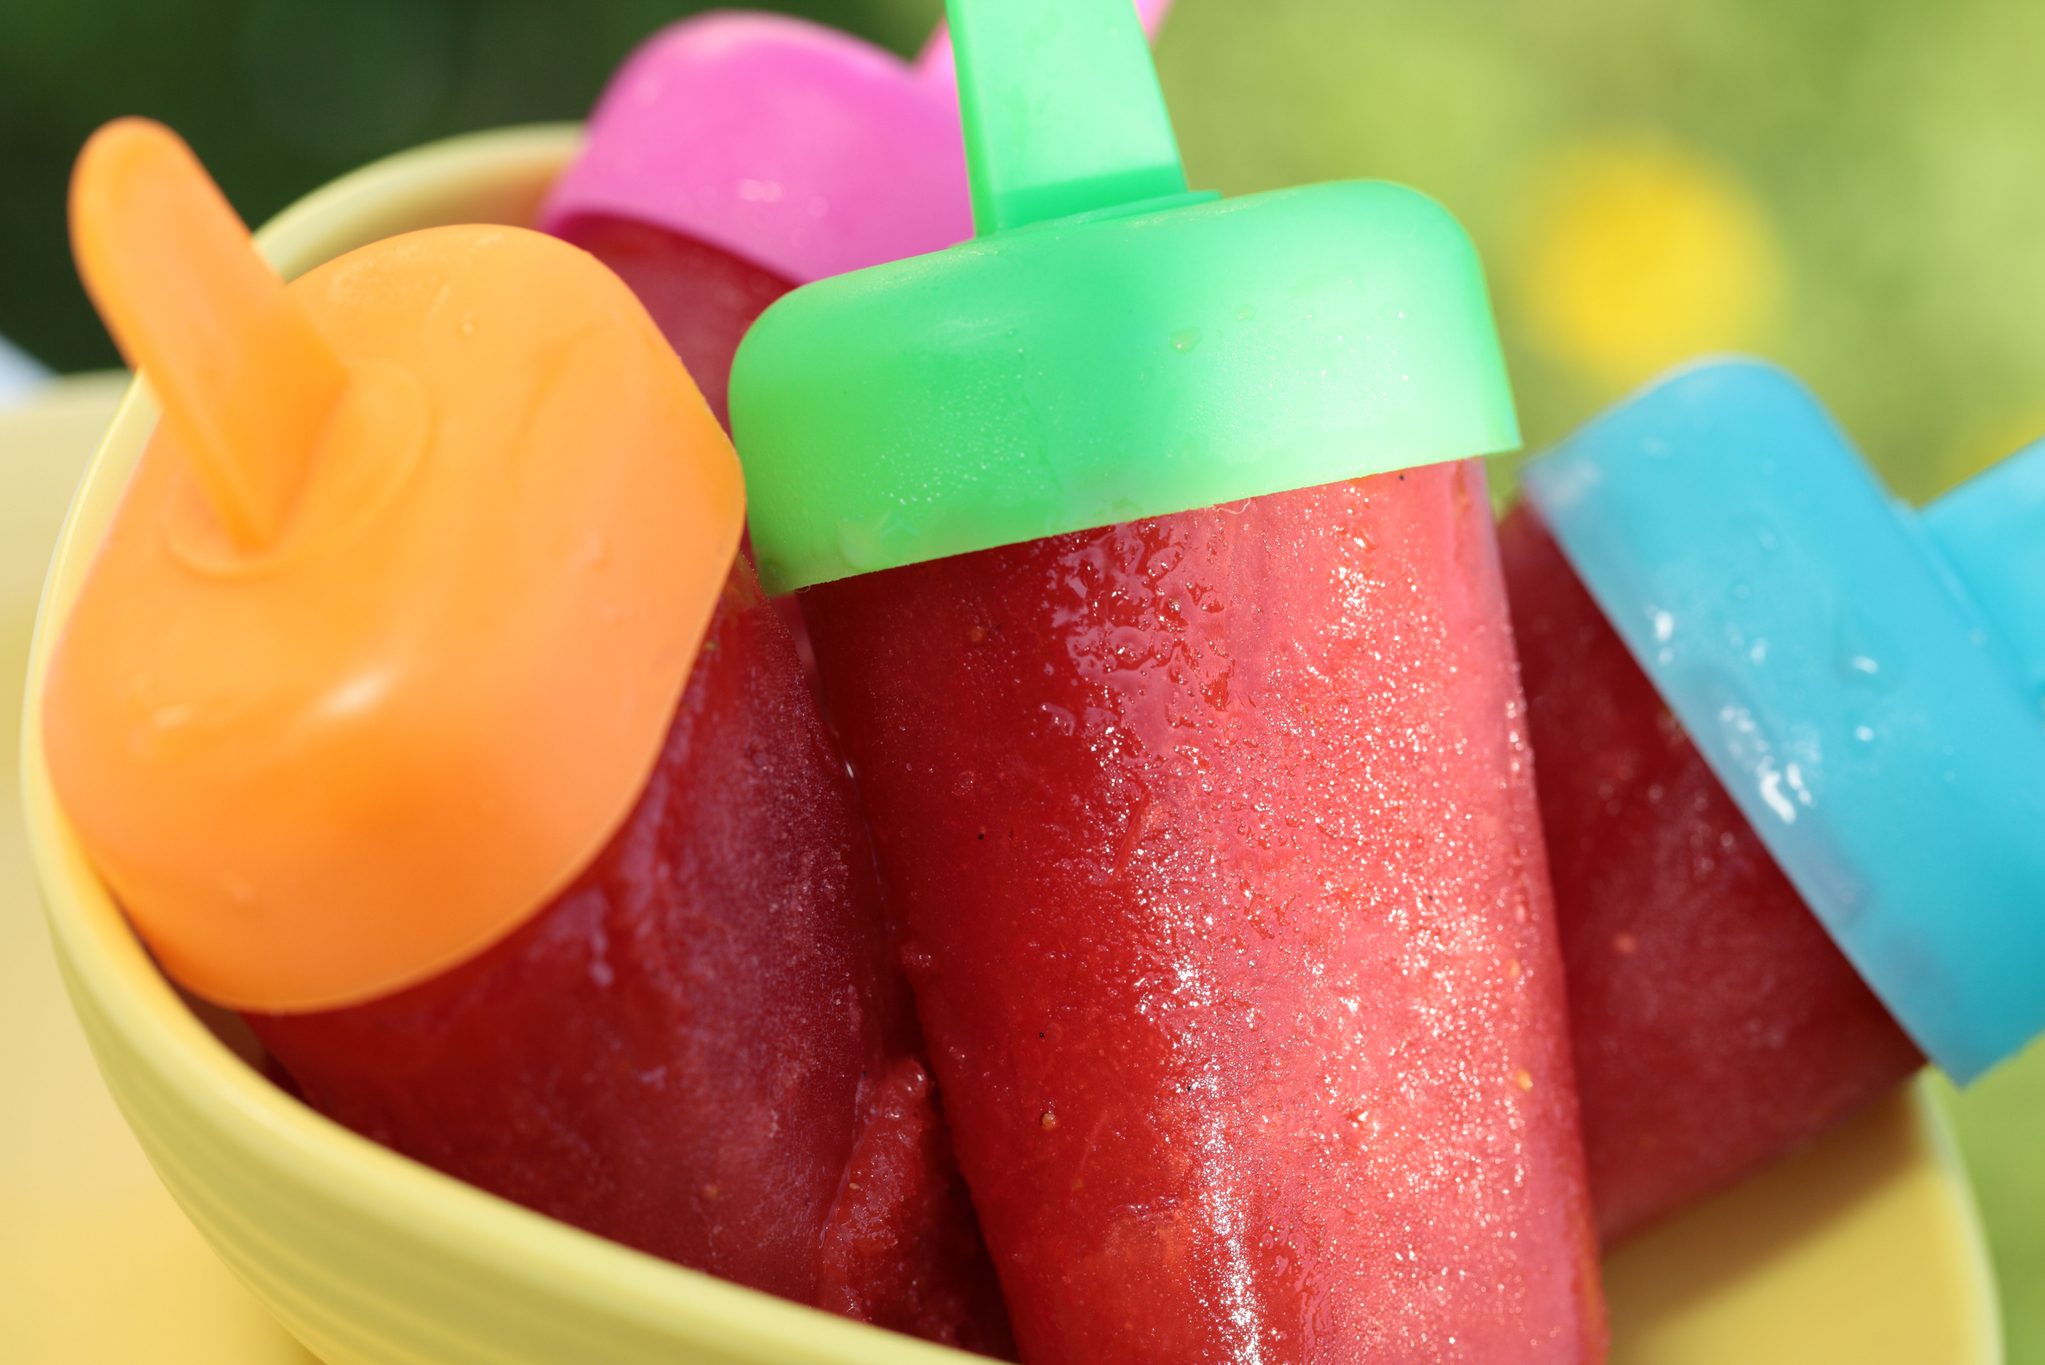 Bring Back Your Childhood with These Popsicle Recipes